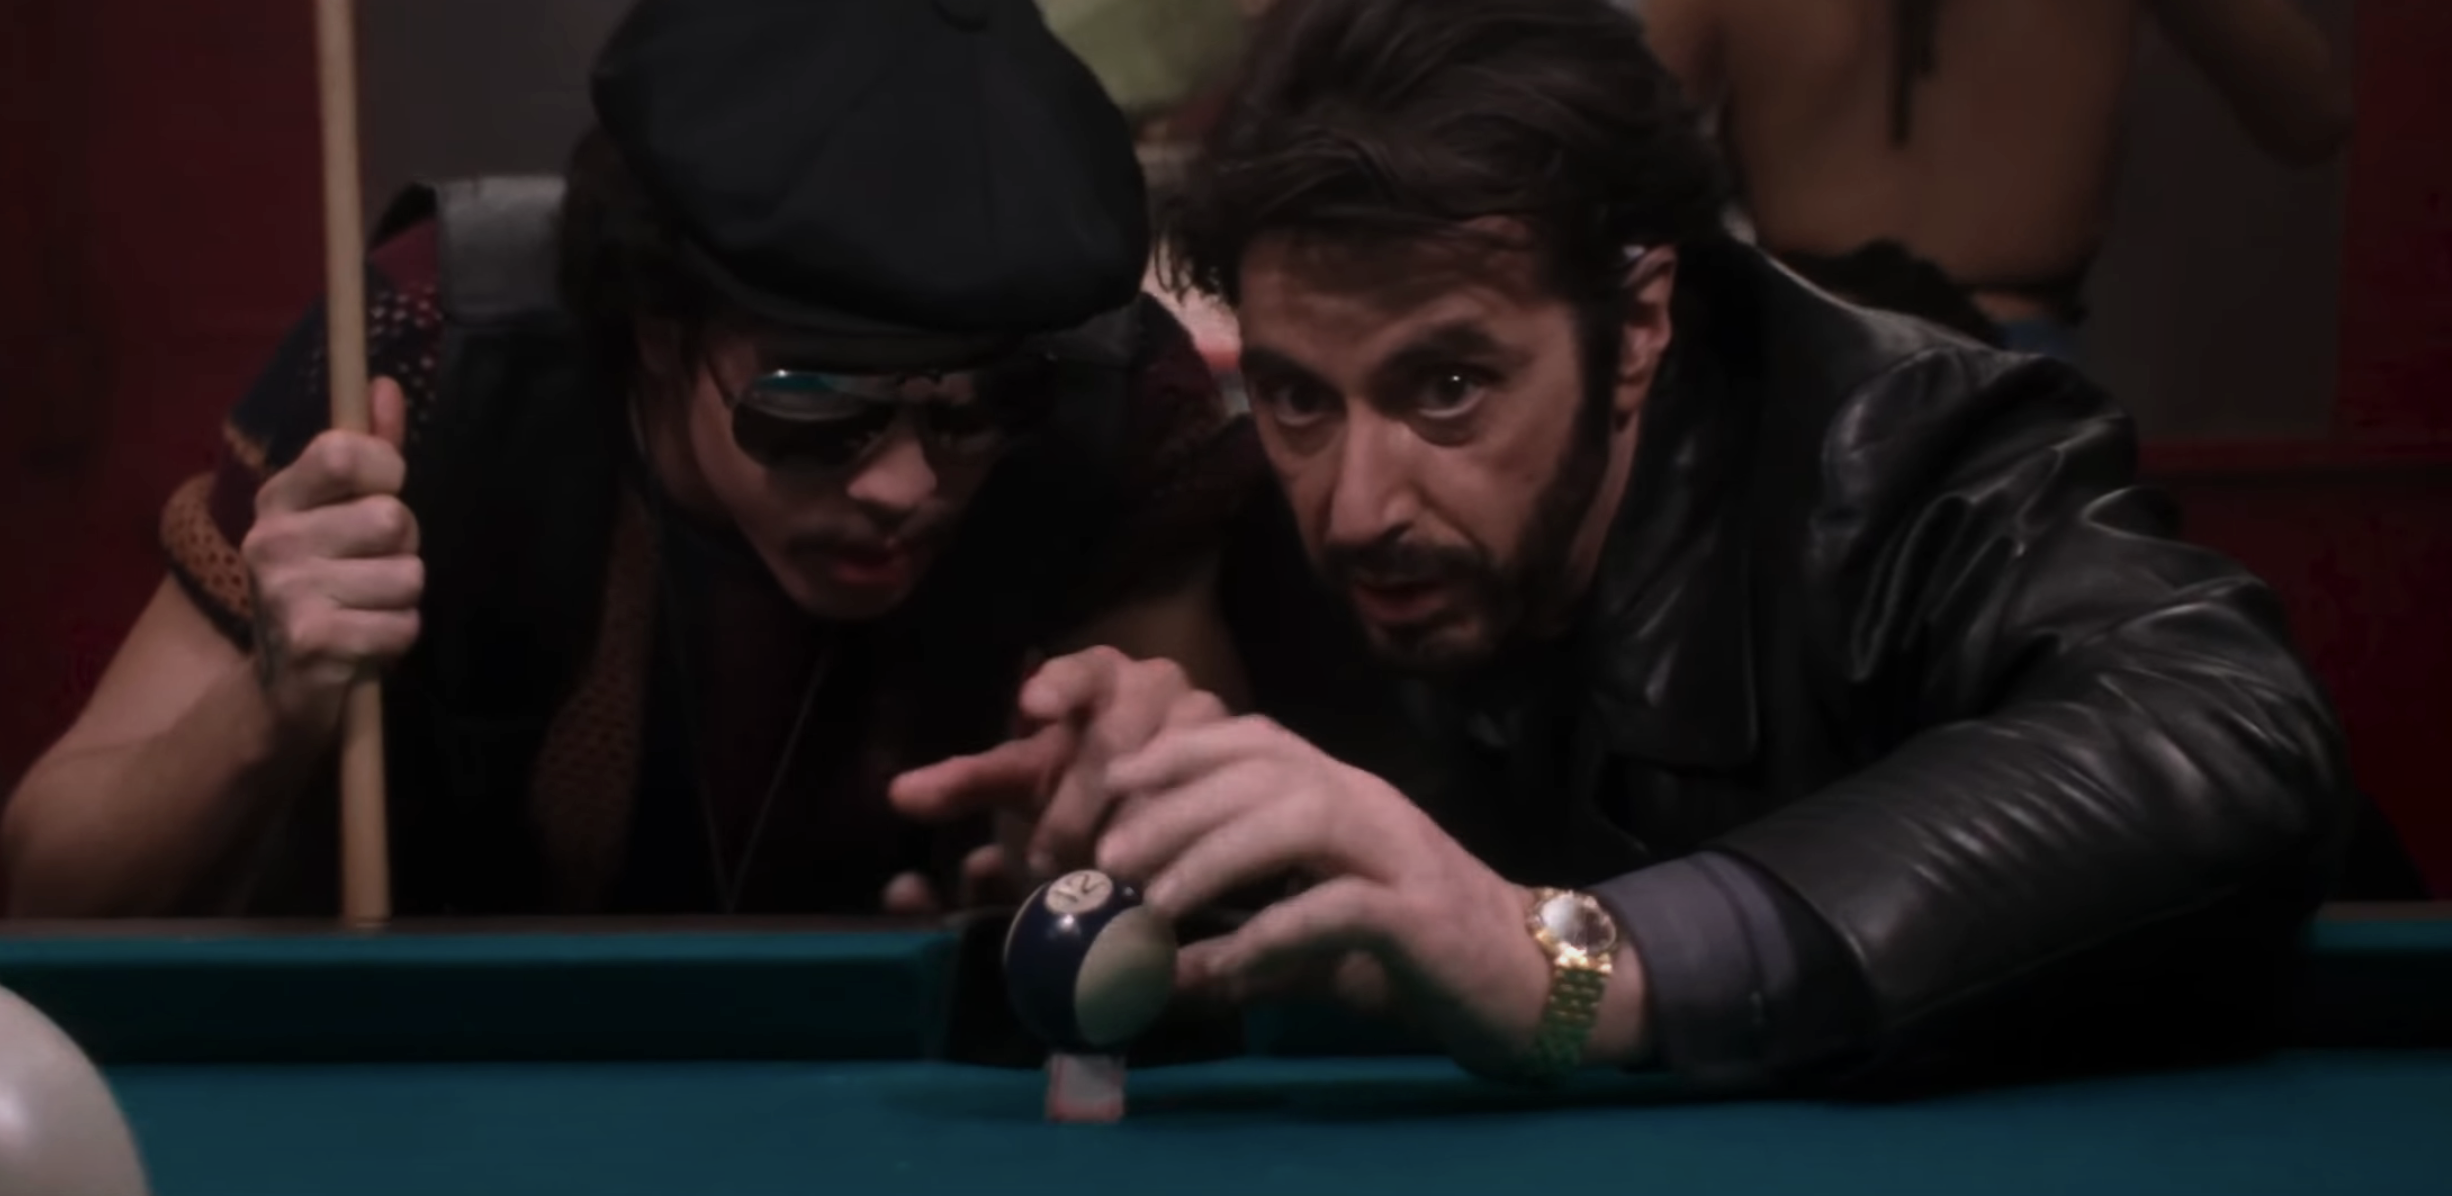 Two men playing pool, one aiming the cue, the other observing closely